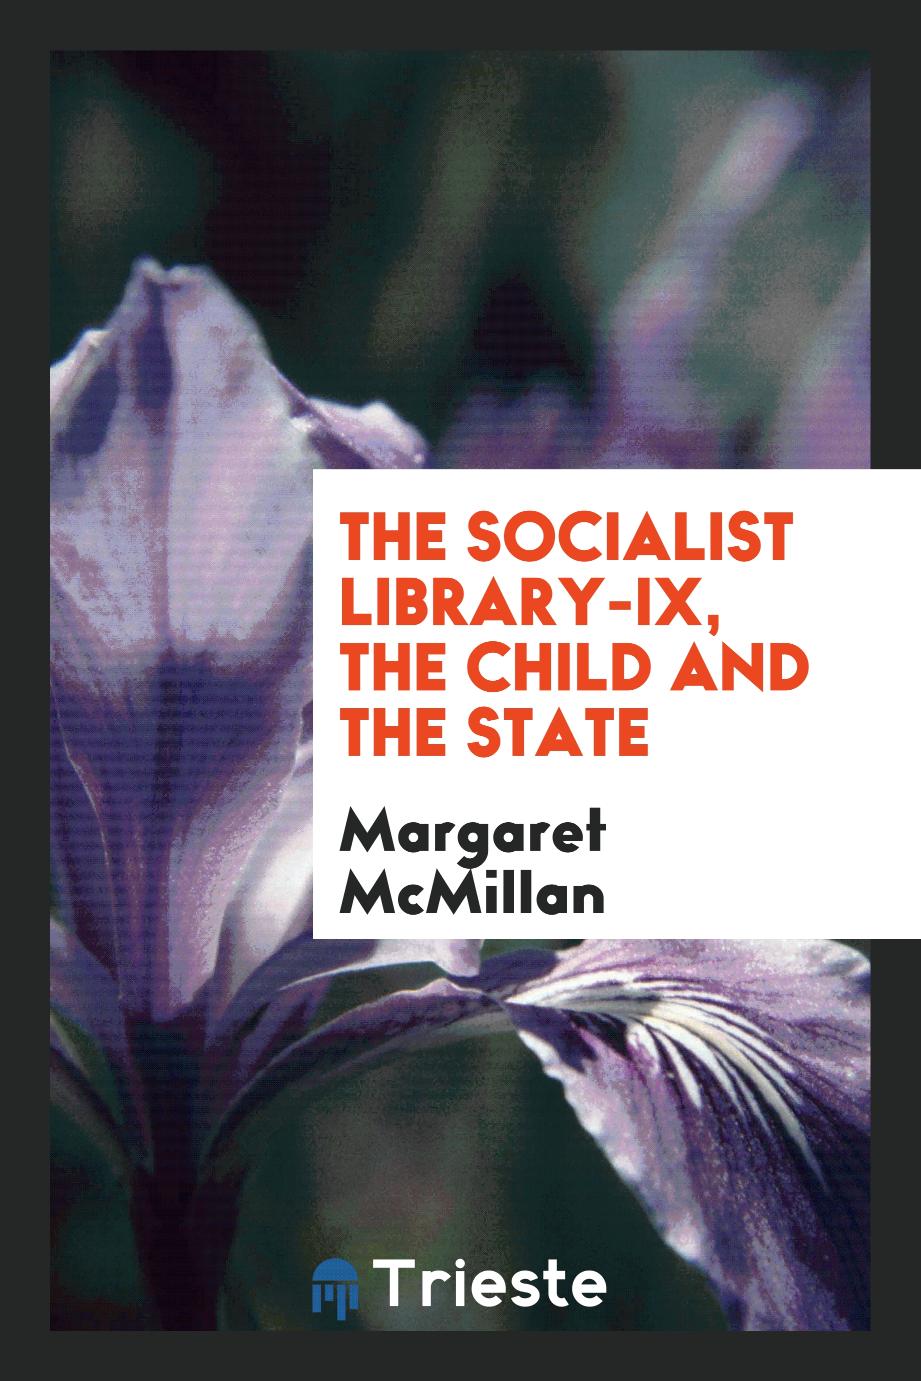 The Socialist Library-IX, The child and the state